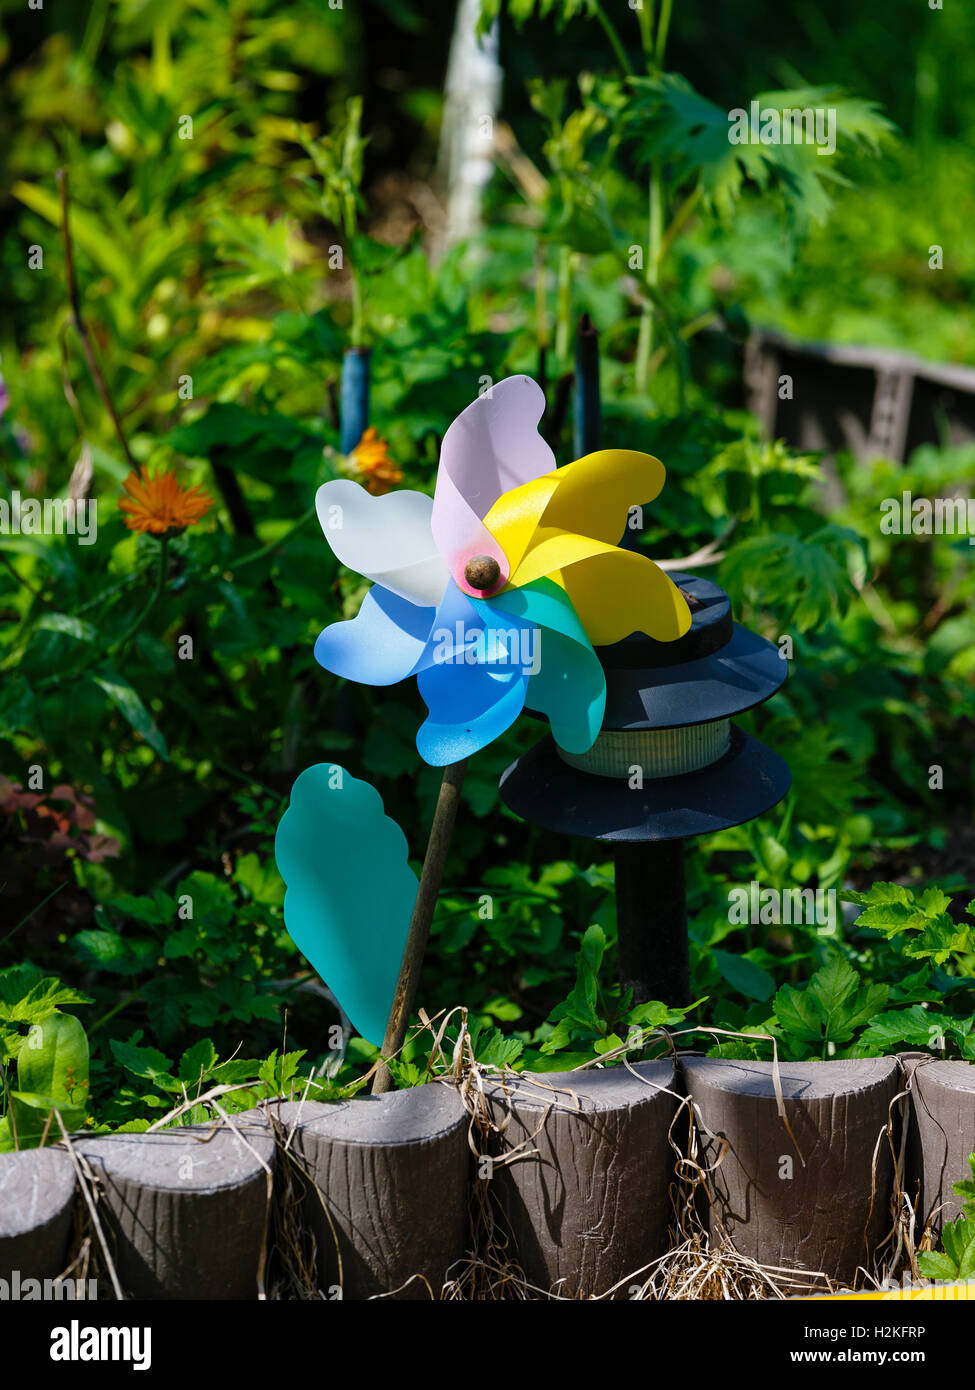 Windy revolving object in a garden Stock Photo